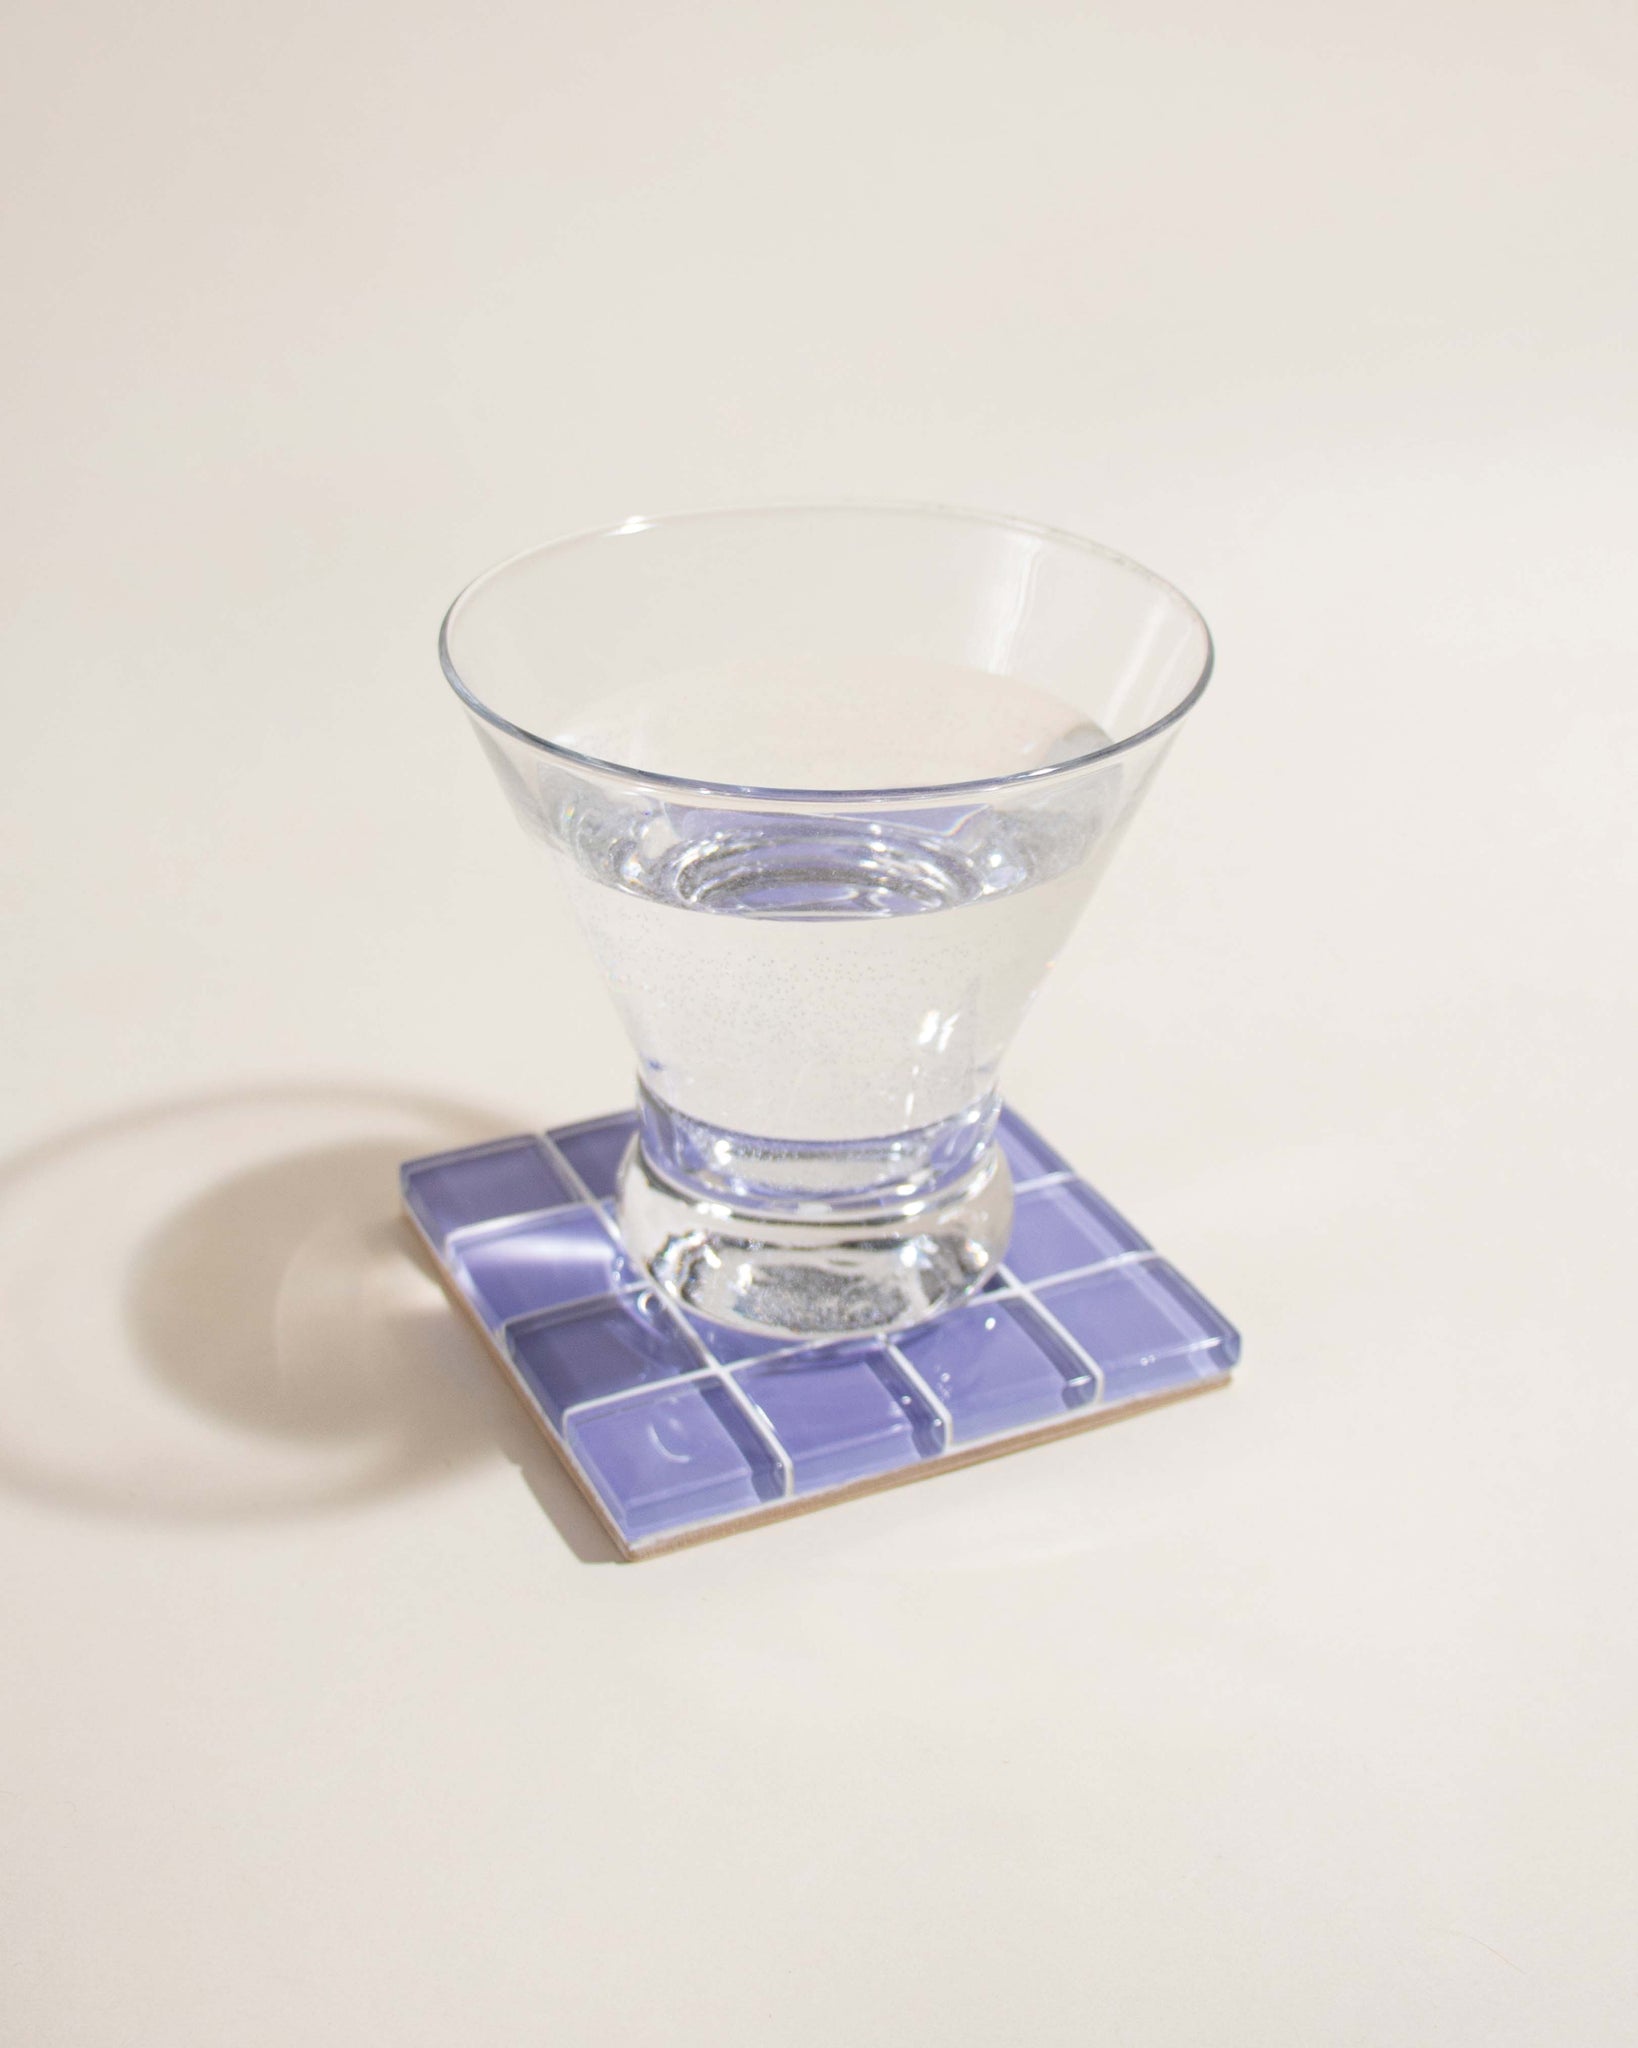 GLASS TILE COASTER - It's Lilac